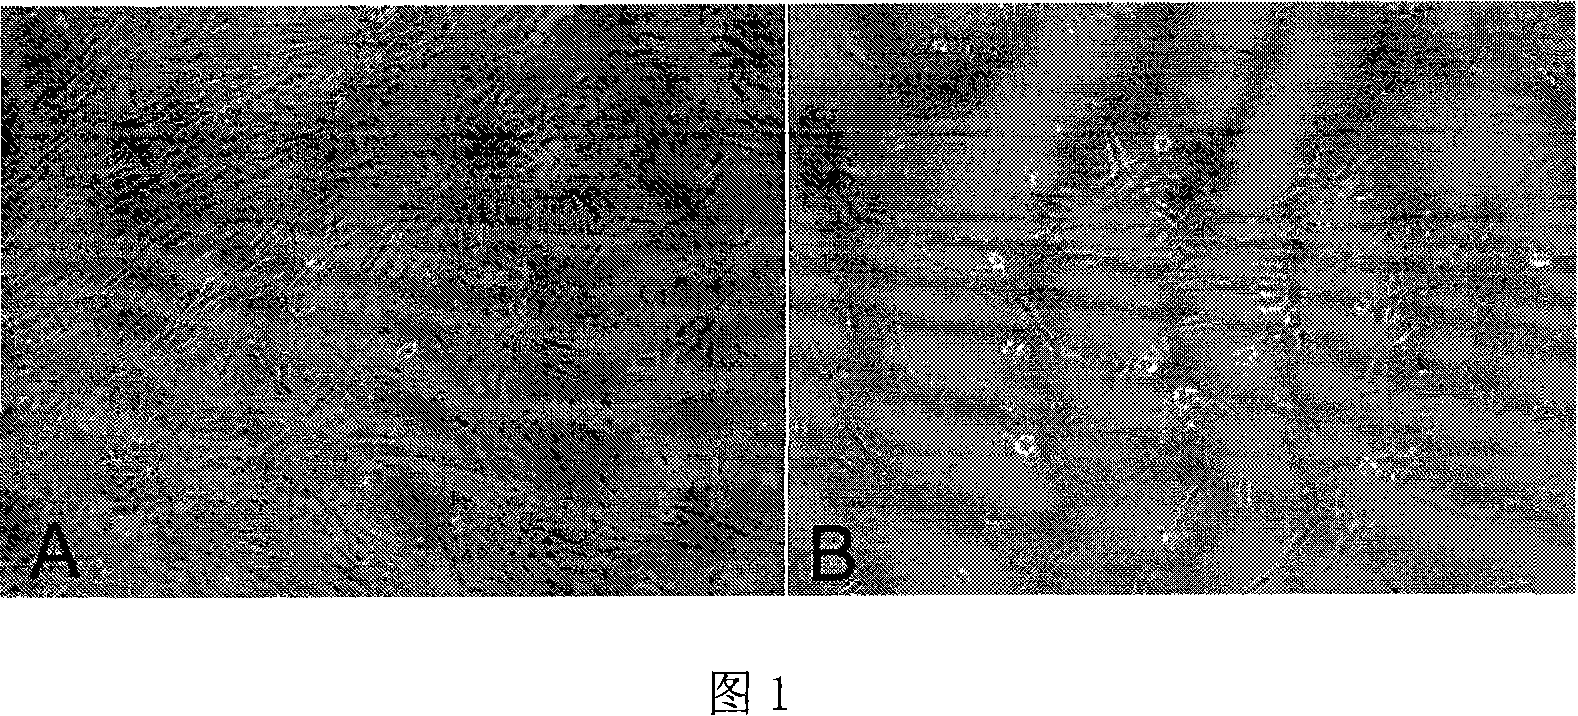 Artificial crystal with antiproliferous medicine coating for preventing and treating after-cataract forming